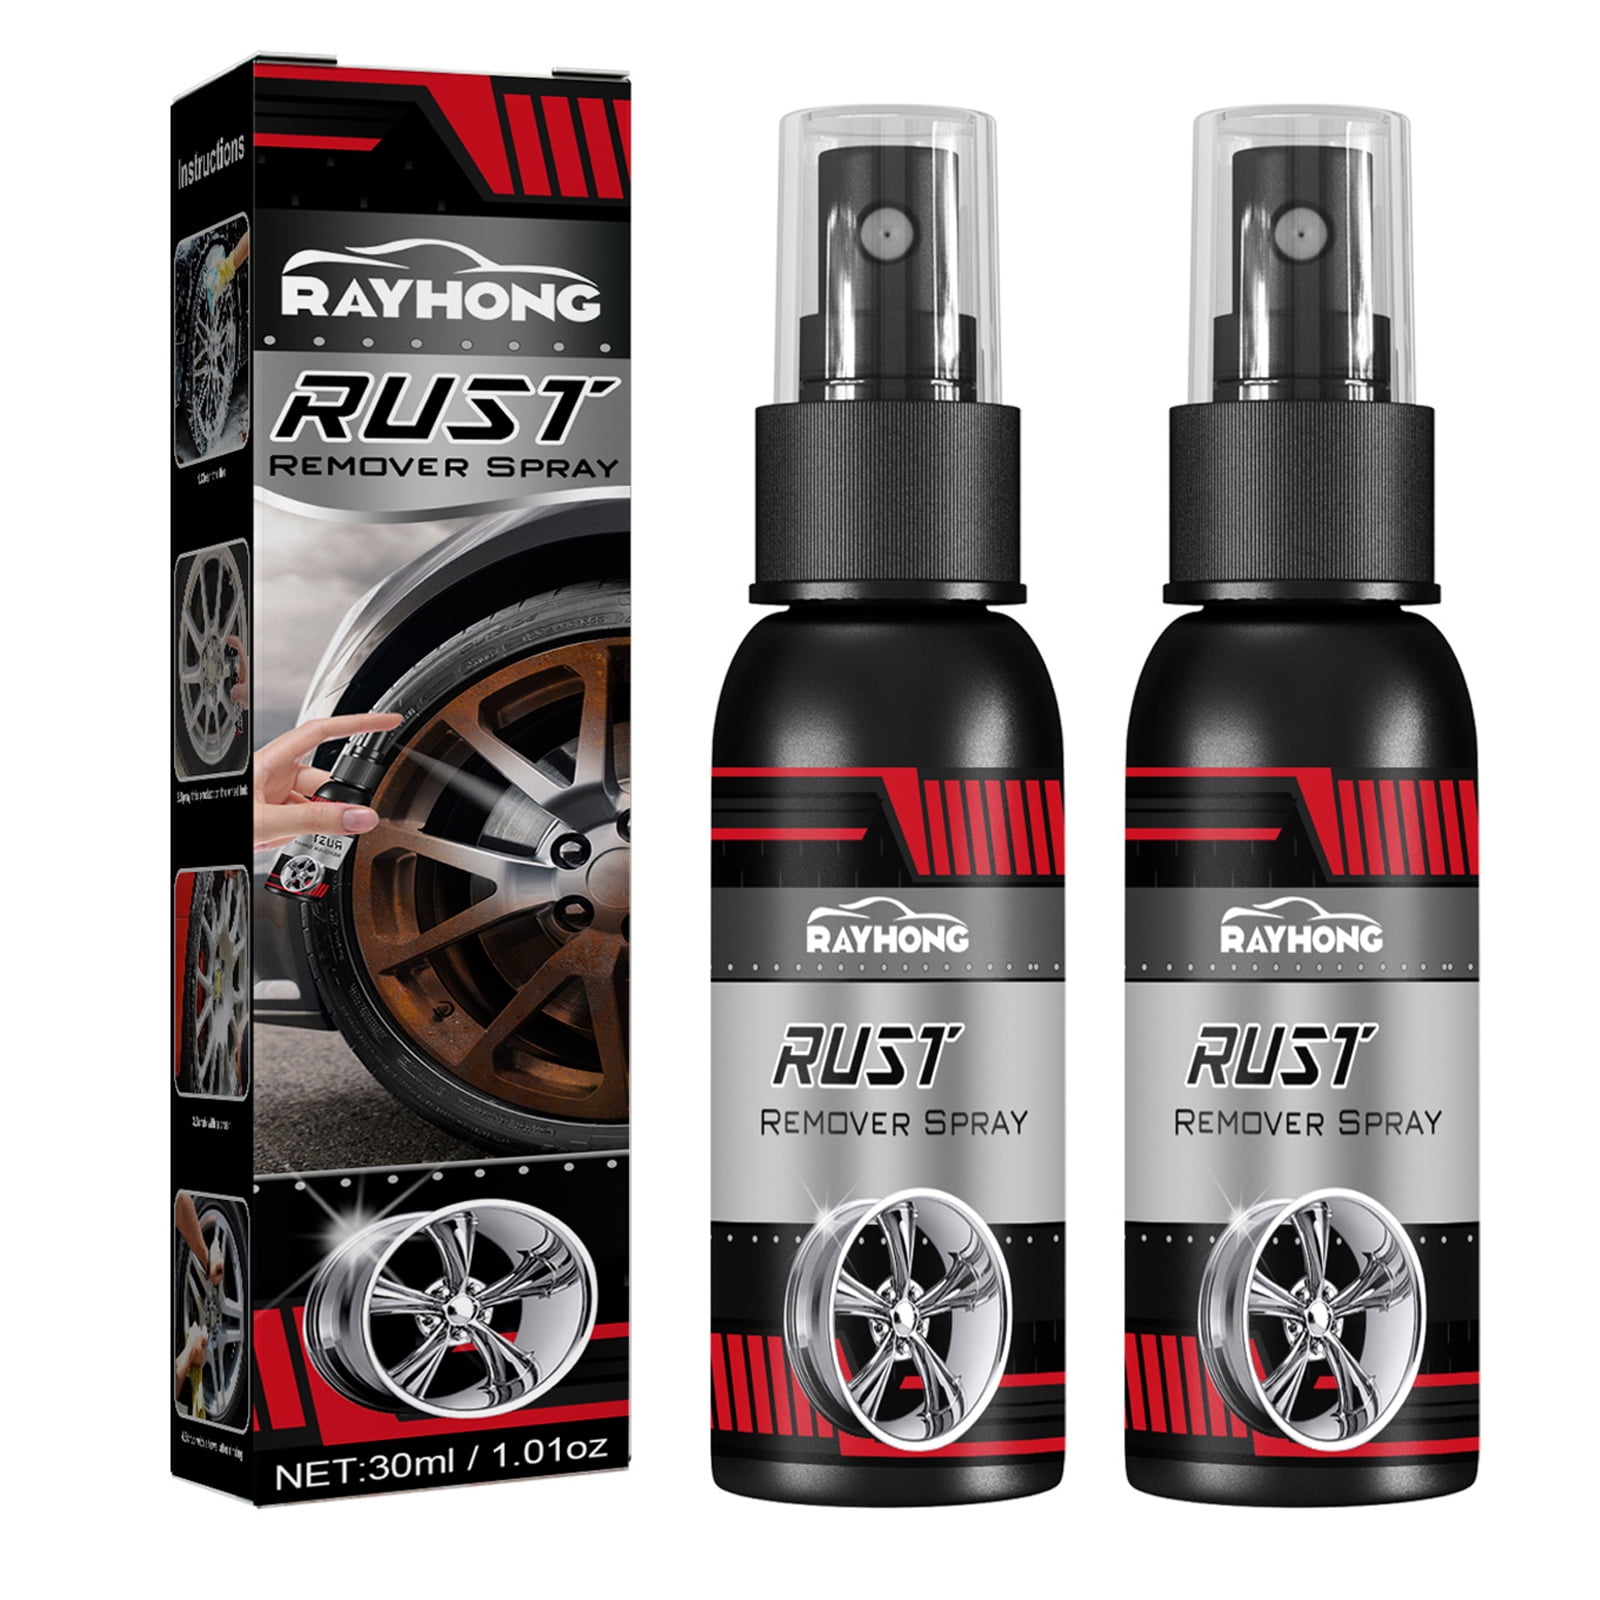 2 Pack Car Rust Remover Wheel Cleaner, Auto-Rost-Entferner, Car Rust  Inhibitor, Rim and Tyre, Car Derusting Spray Maintenance Cleaning  Accessories,1Fl Oz/30ml 